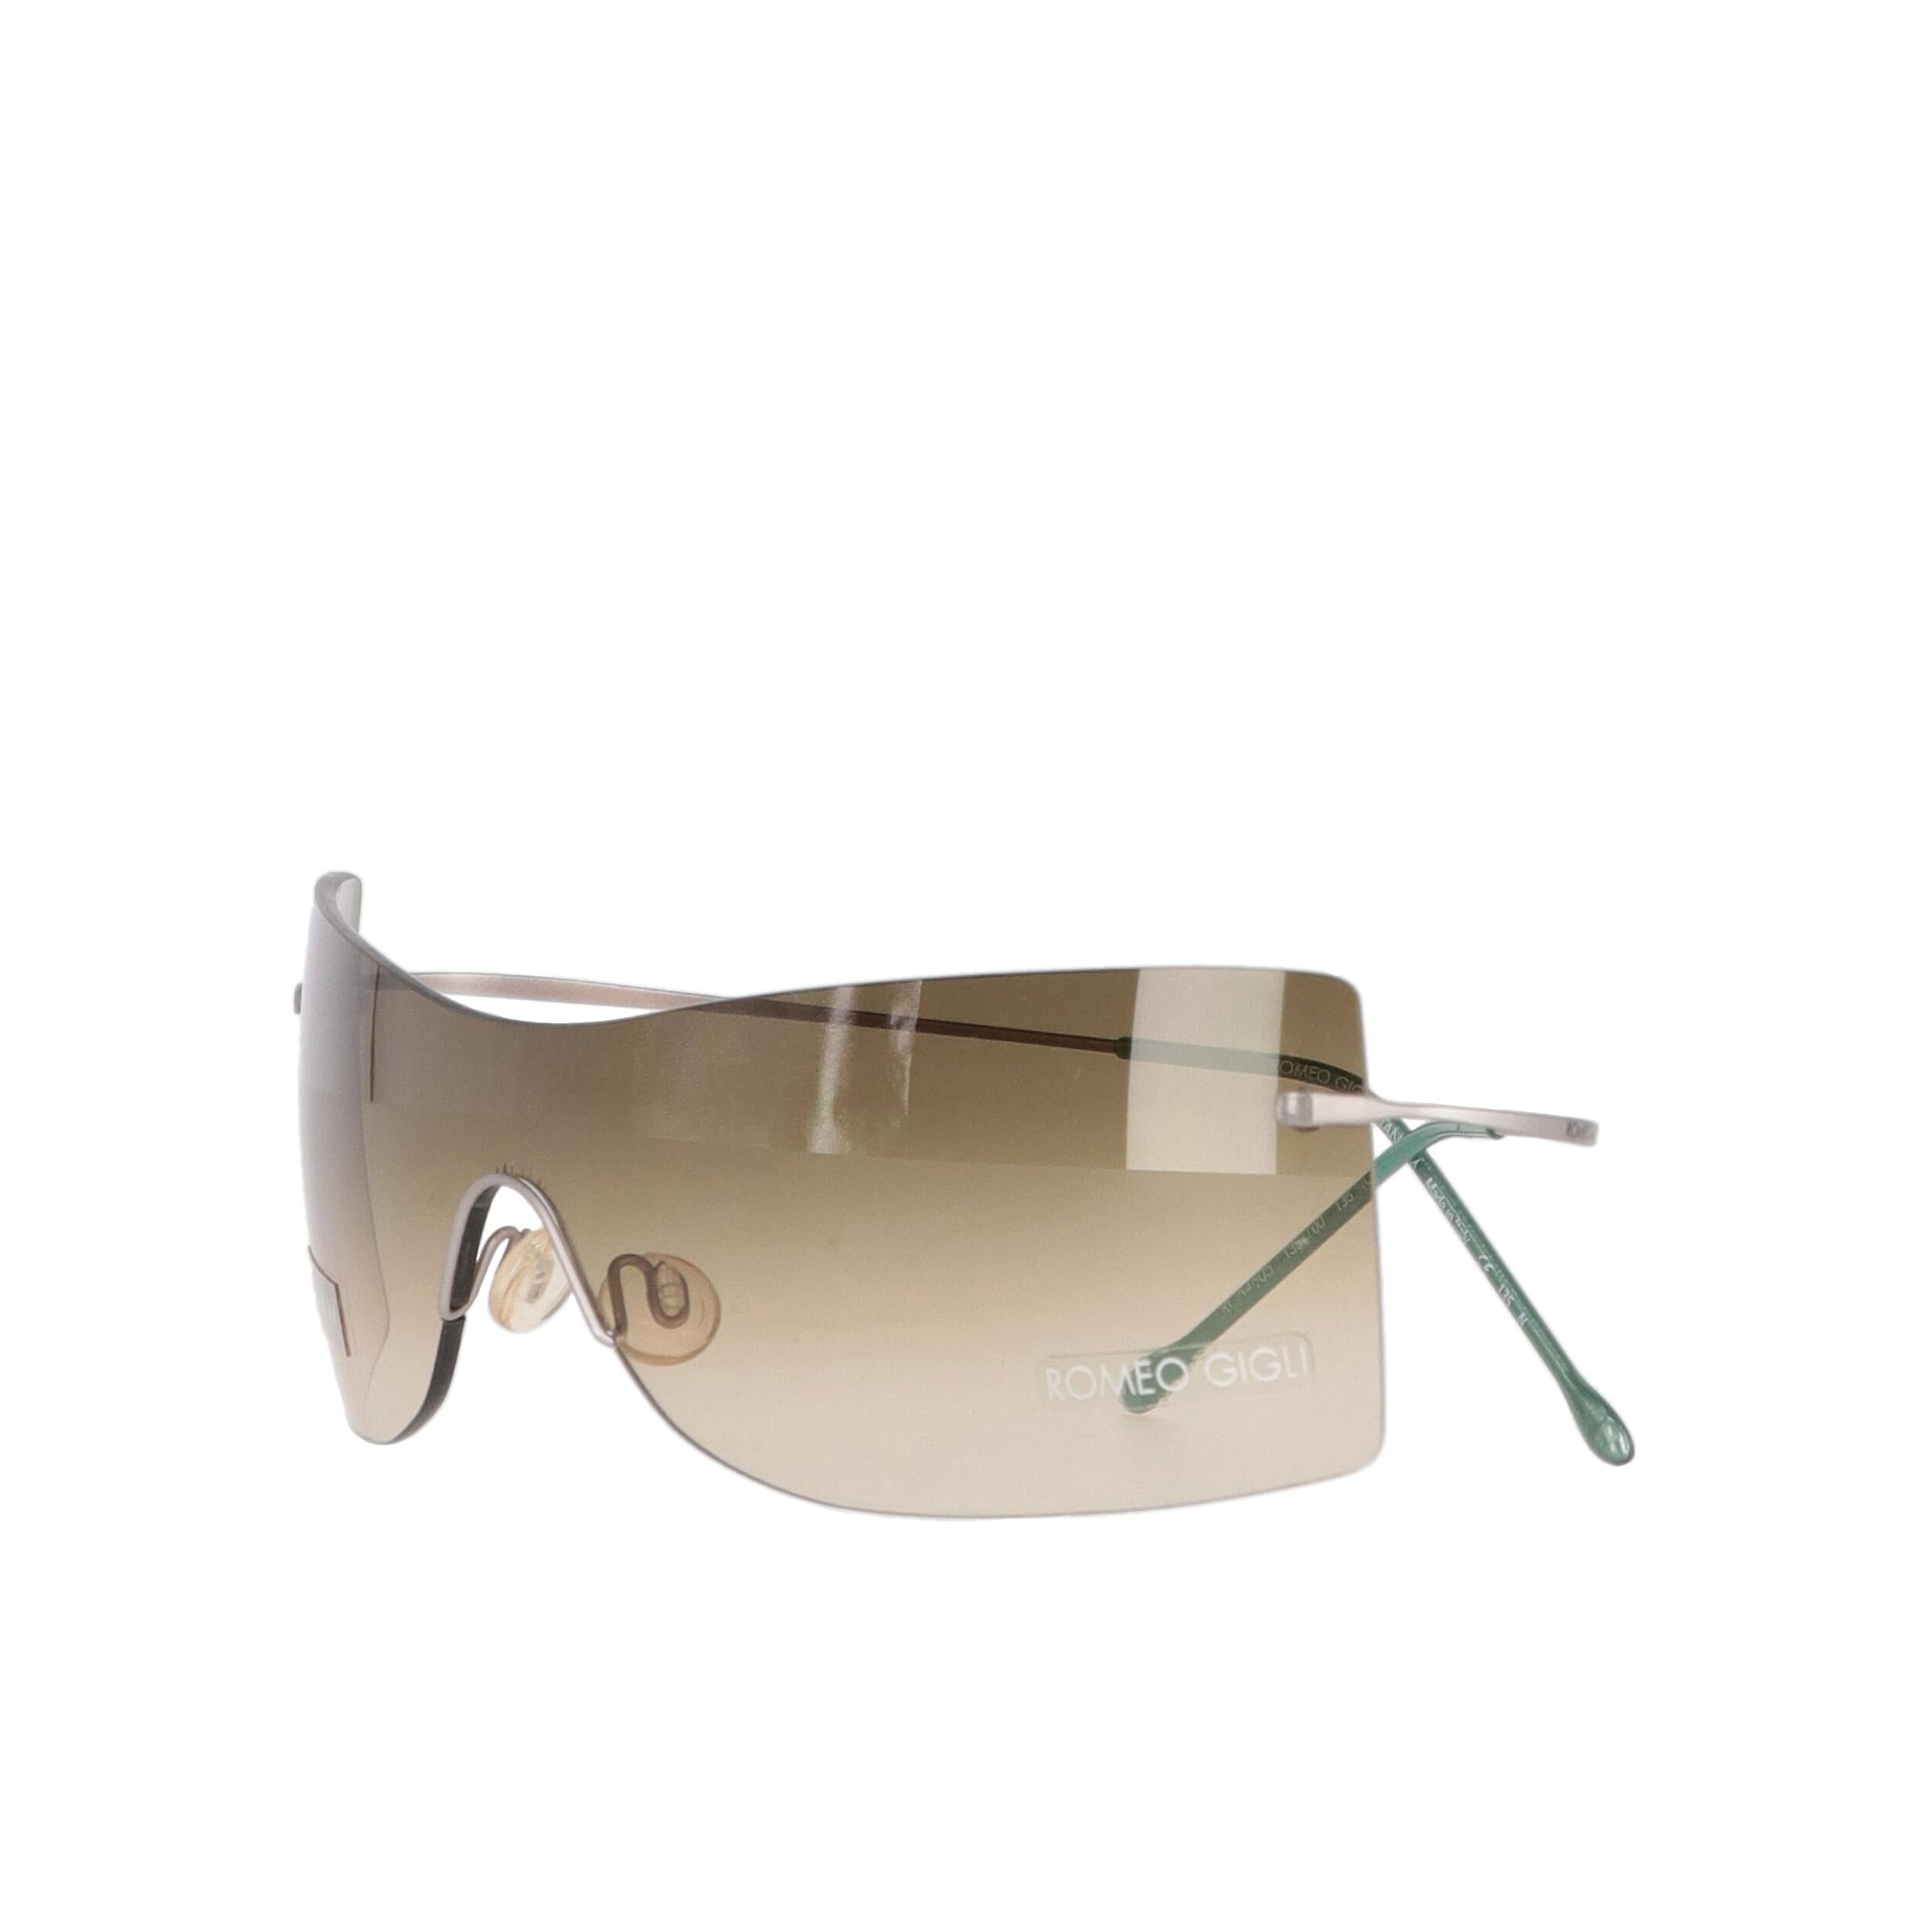 Romeo Gigli beige mask sunglasses with thin titanium temples.

Please note, this item cannot be shipped to the US.
Years: 90s

Made in Italy

Width: 15,5 cm
Height: 4 cm